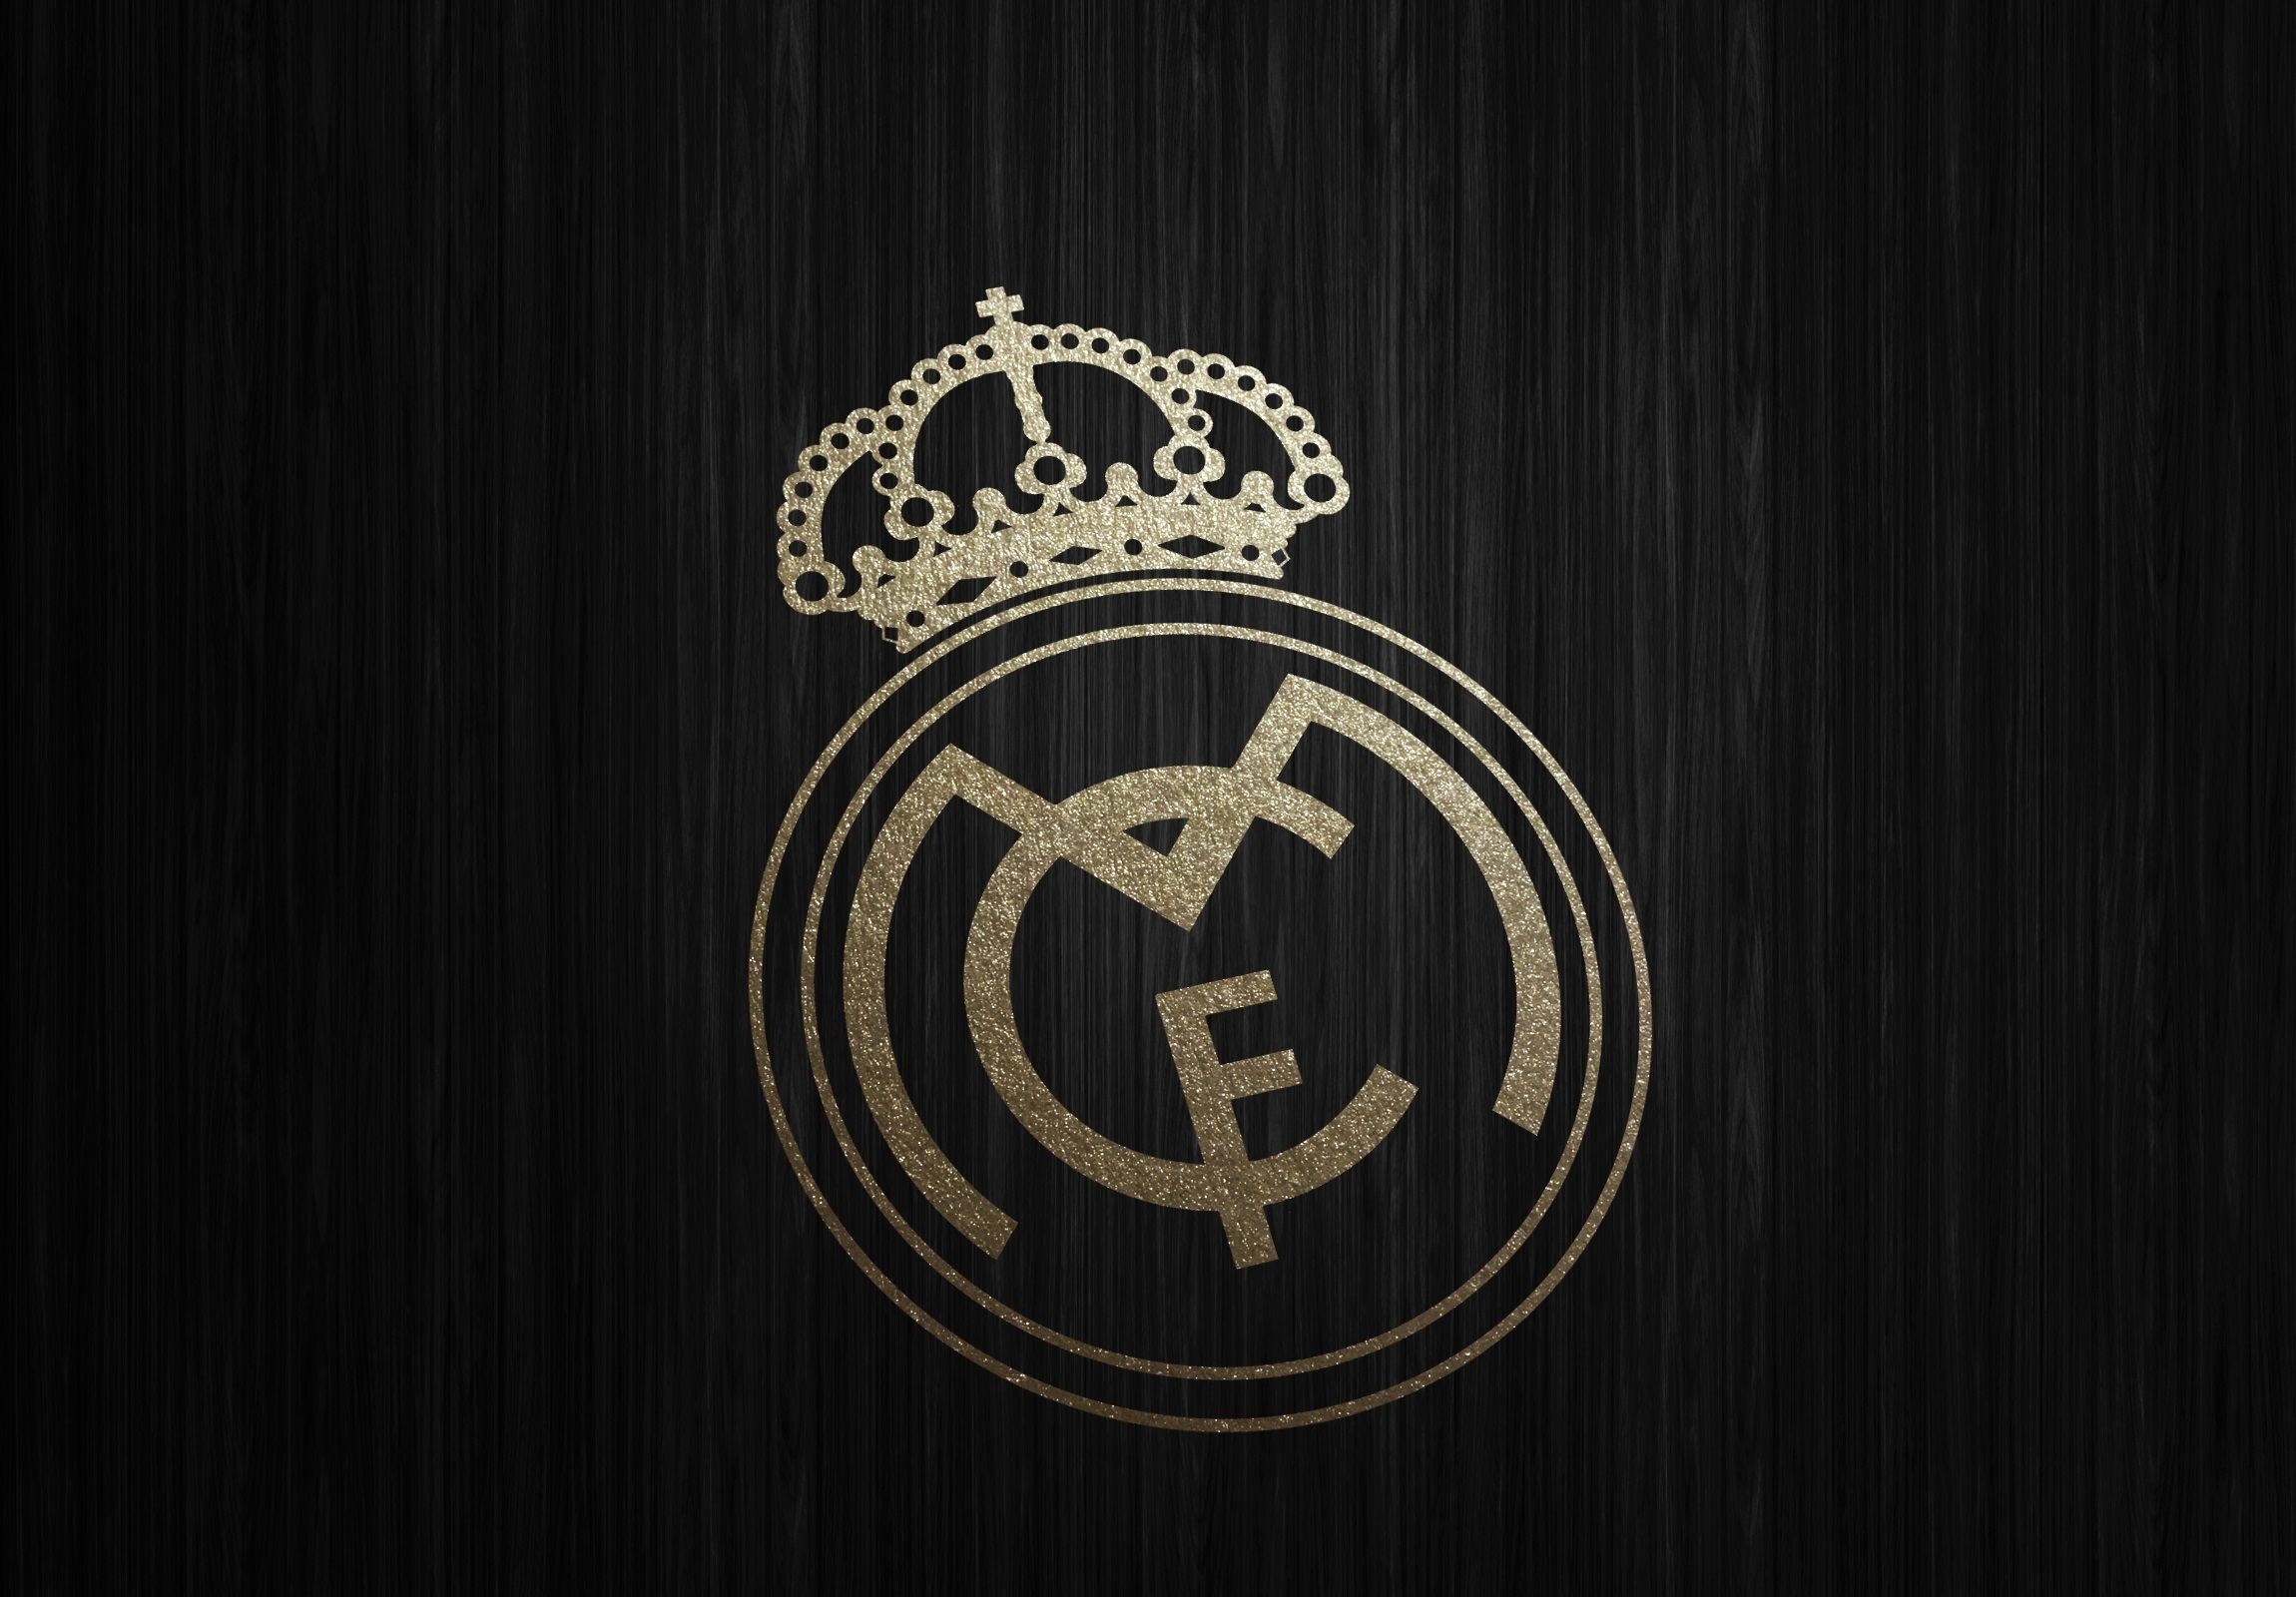 10 Latest Real Madrid Wallpaper Hd FULL HD 1920×1080 For PC Background